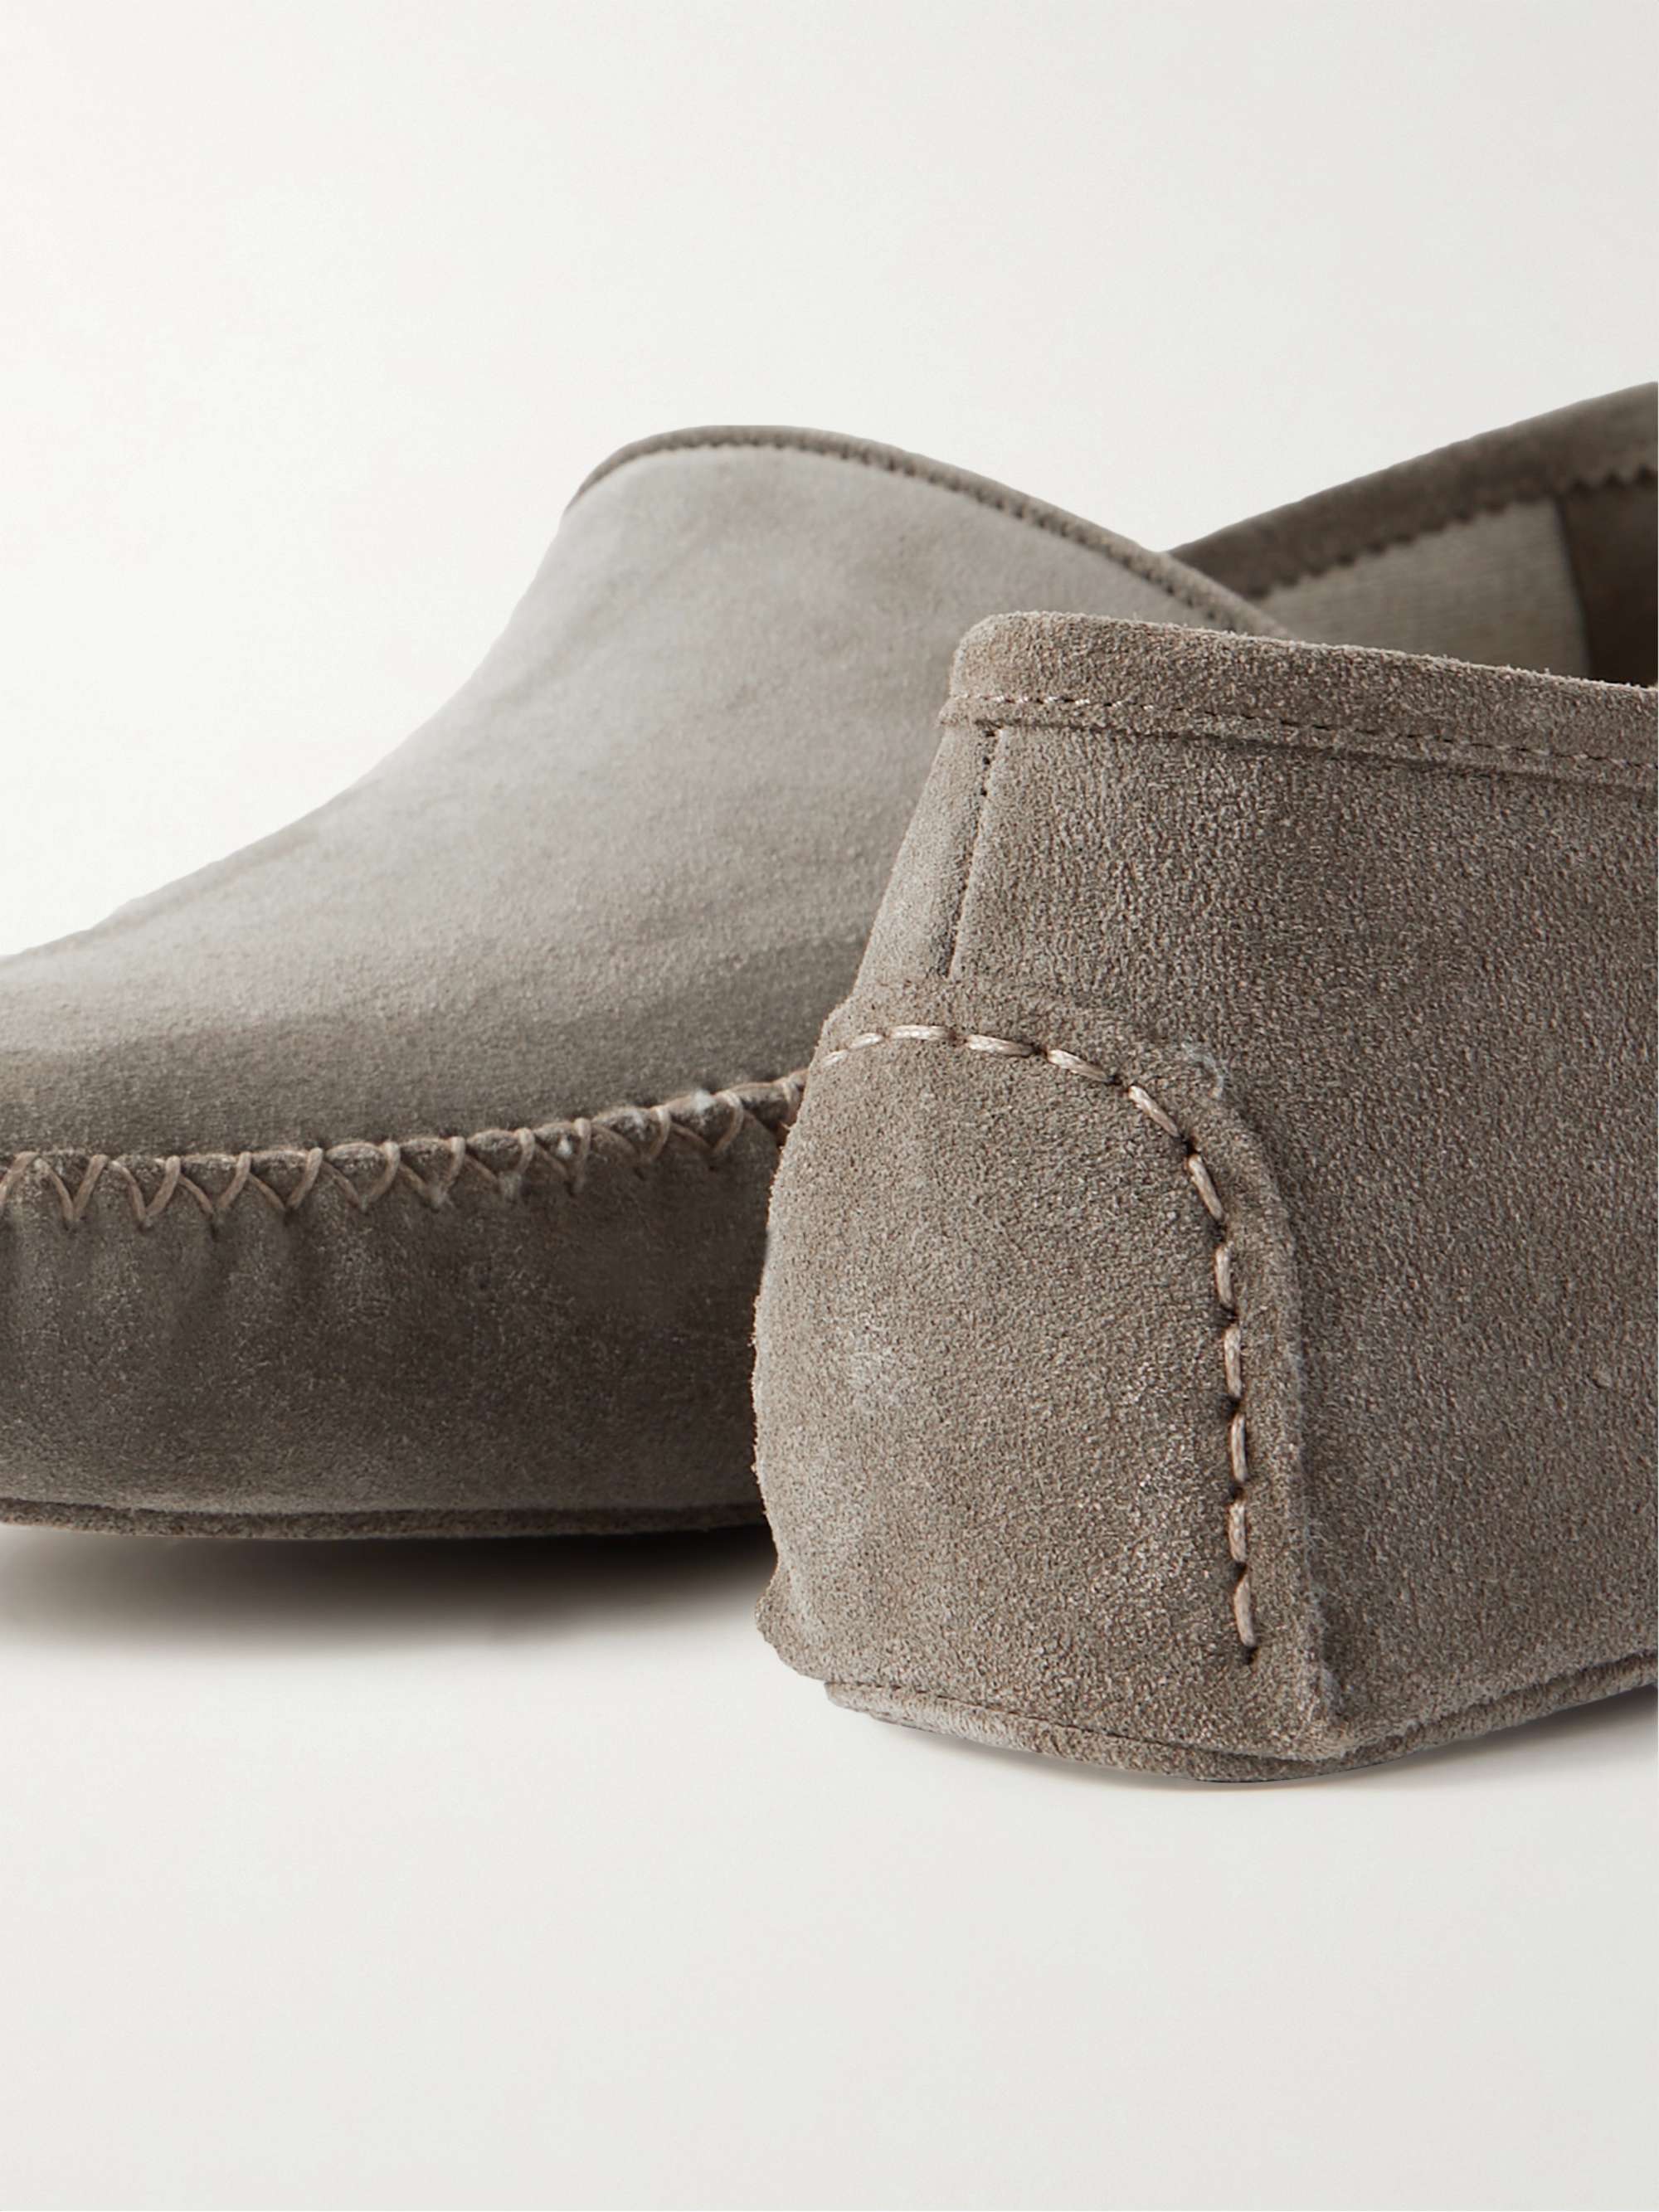 THOM SWEENEY Cashmere-Lined Suede Slippers